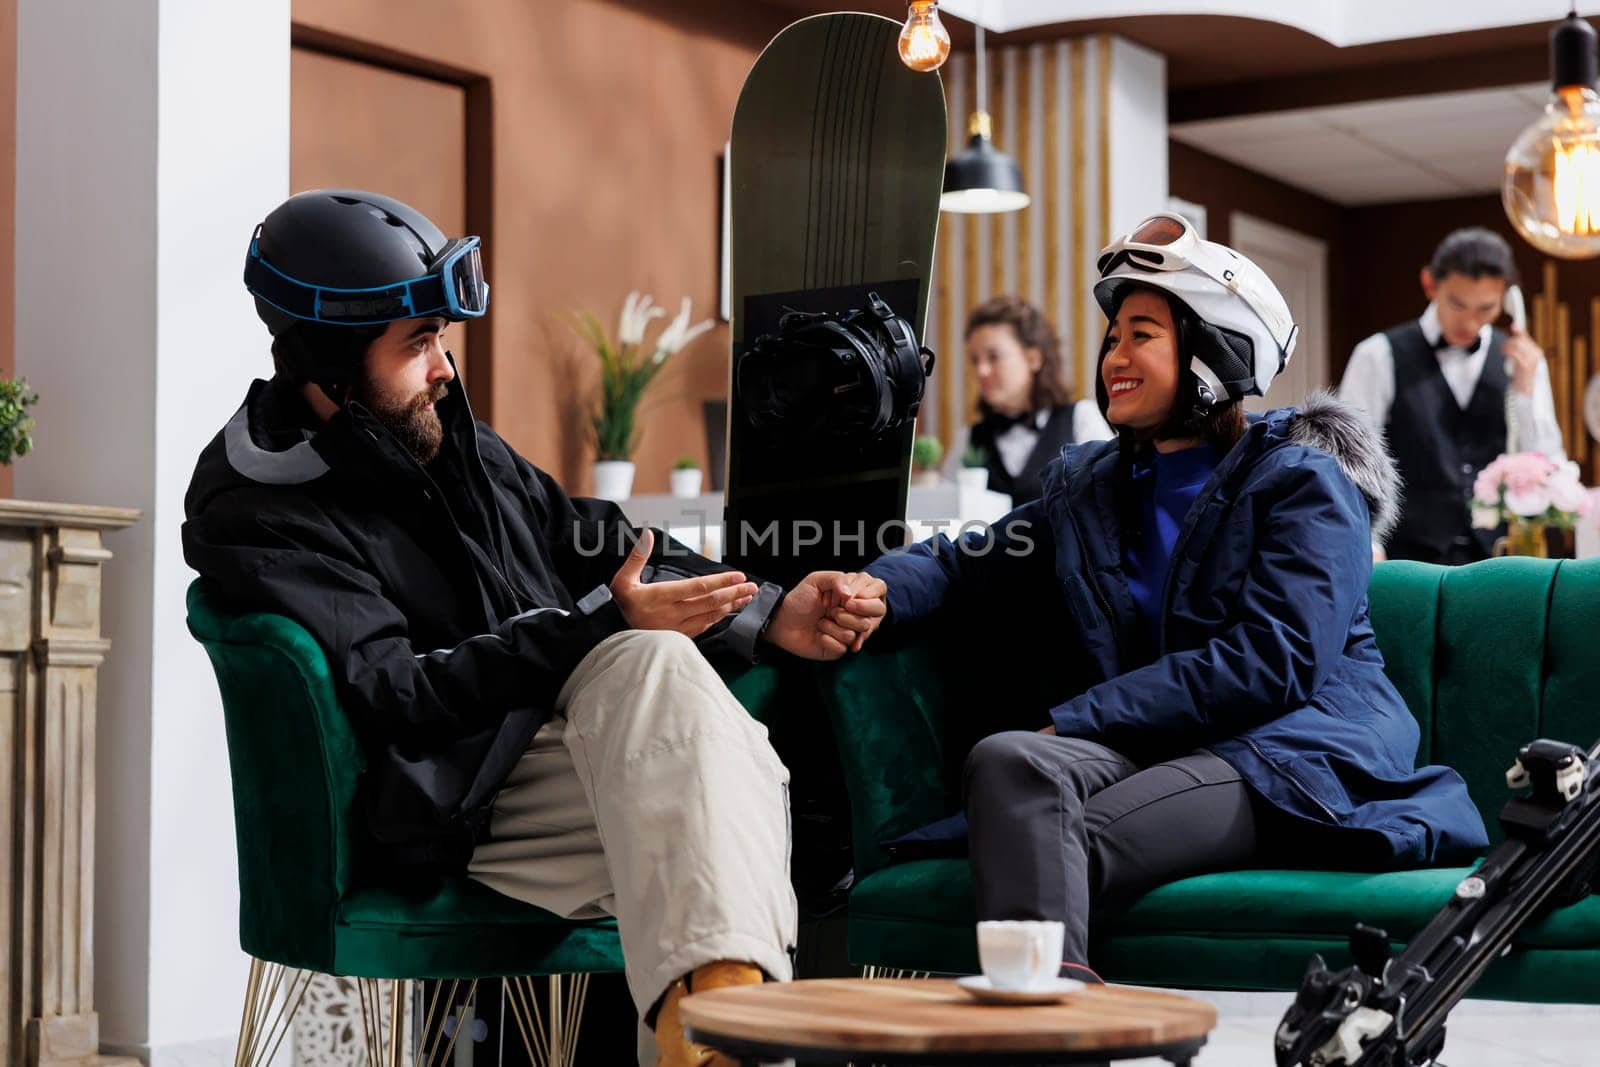 Boyfriend and girlfriend in possession of wintersports equipment engaged in dialogue about plans for skiing and snowboarding. Enthusiastic couple warmly dressed for snow activities seated in lobby.